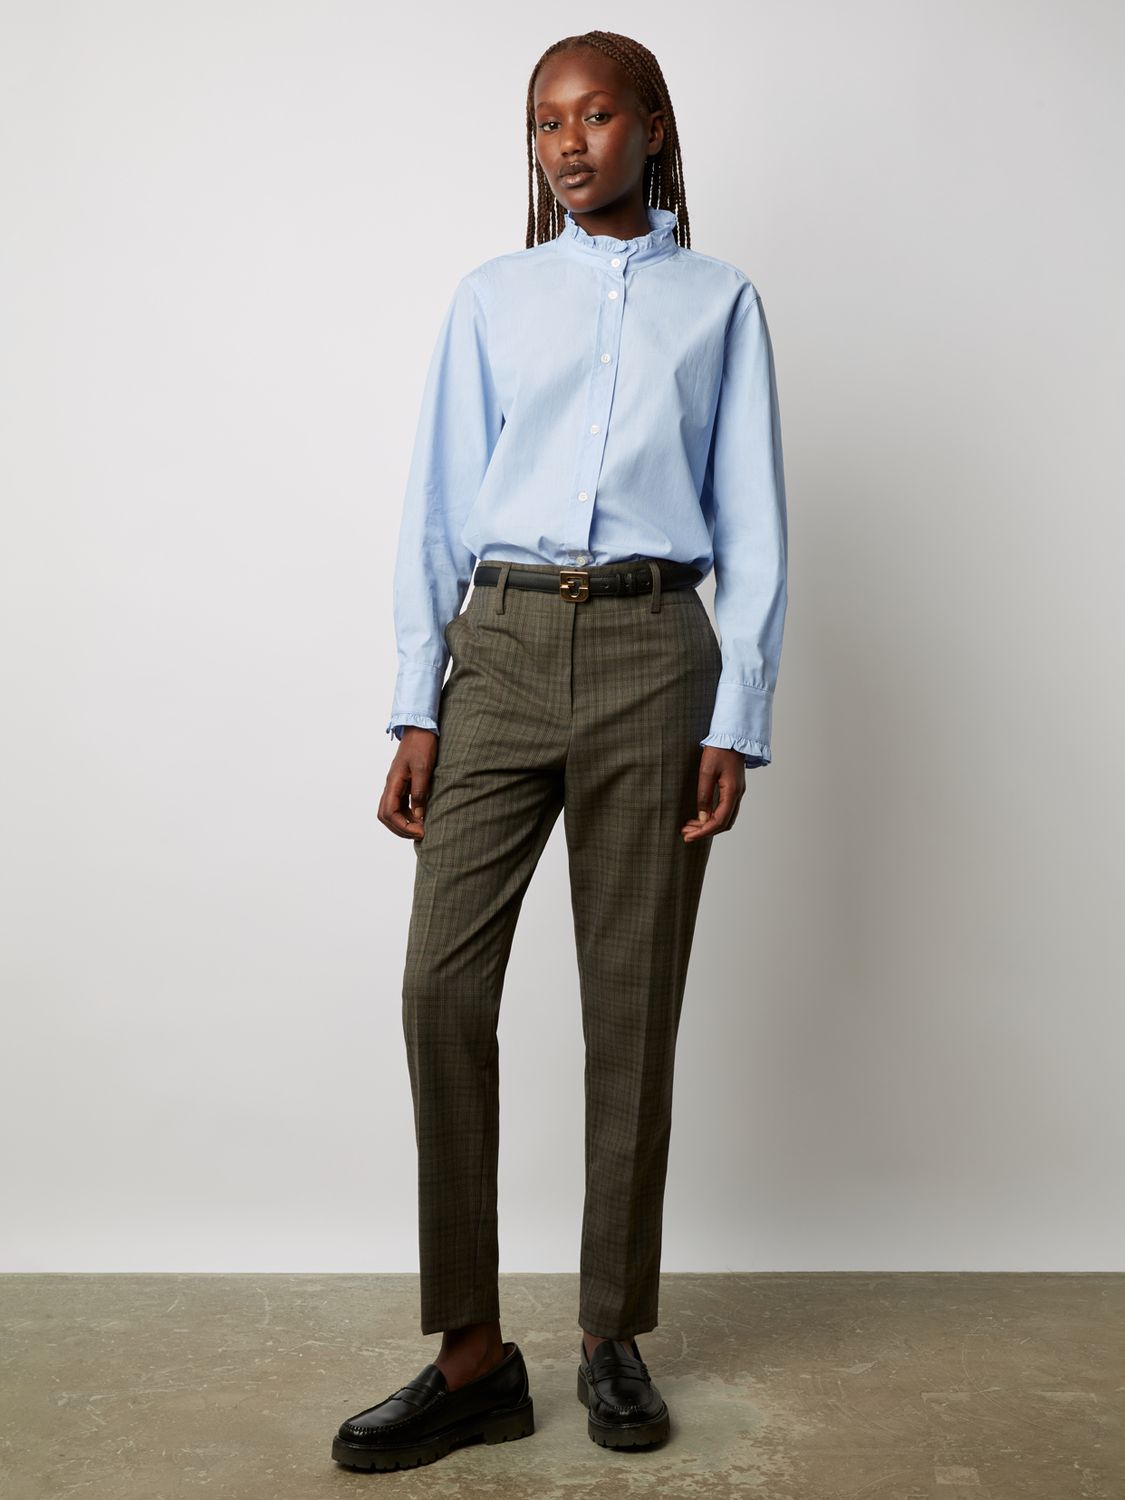 Buy Gerard Darel Edelweiss Check Trousers, Brown Online at johnlewis.com